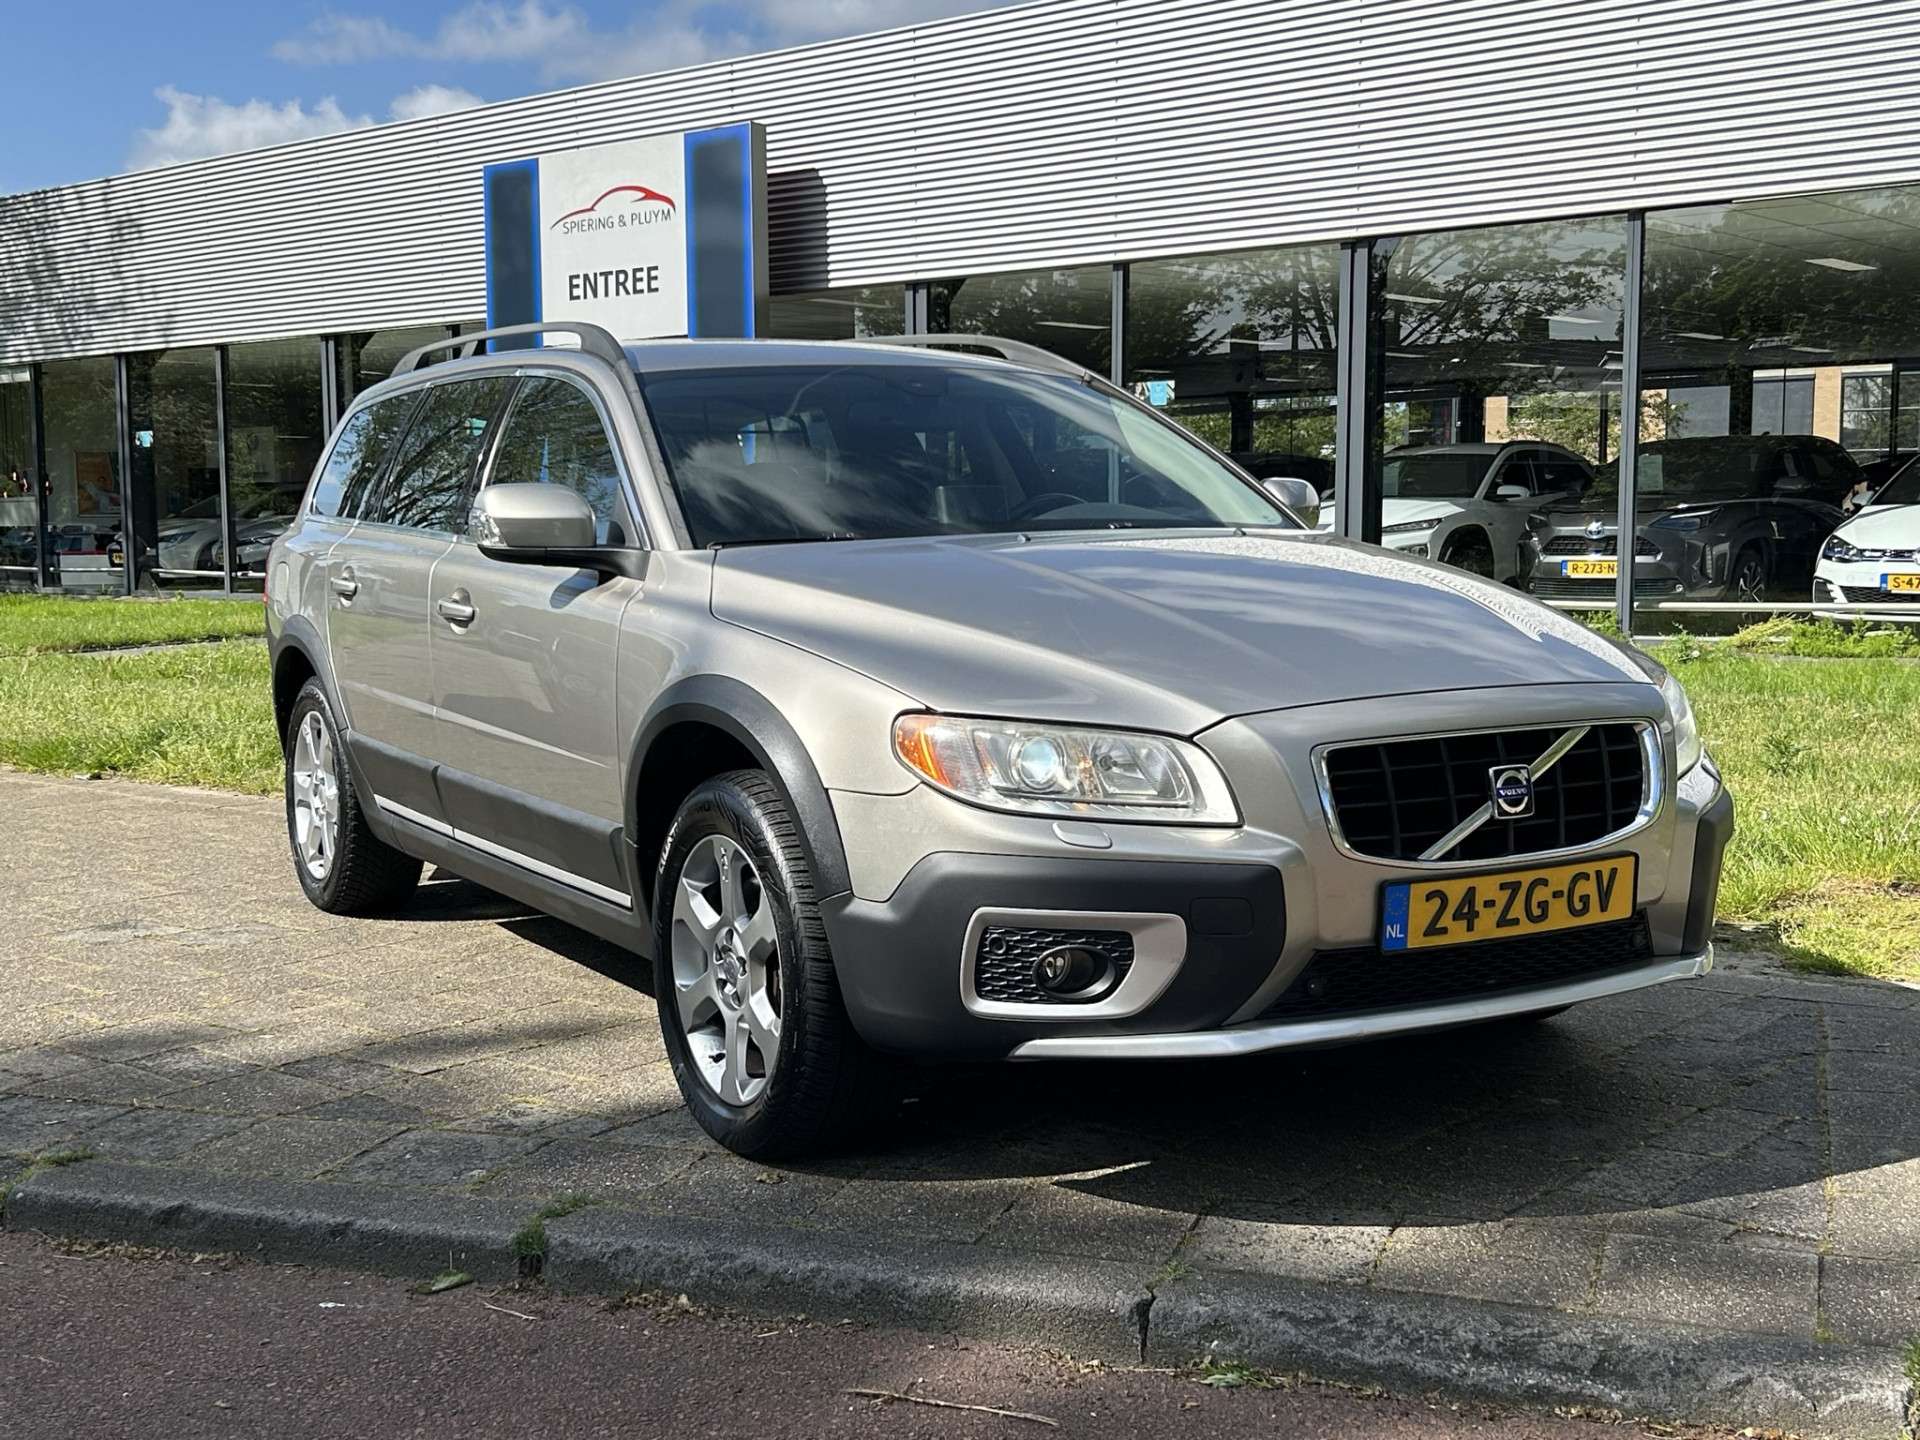 Volvo XC70 Station wagon in Grey used in ROTTERDAM for € 13,940.-